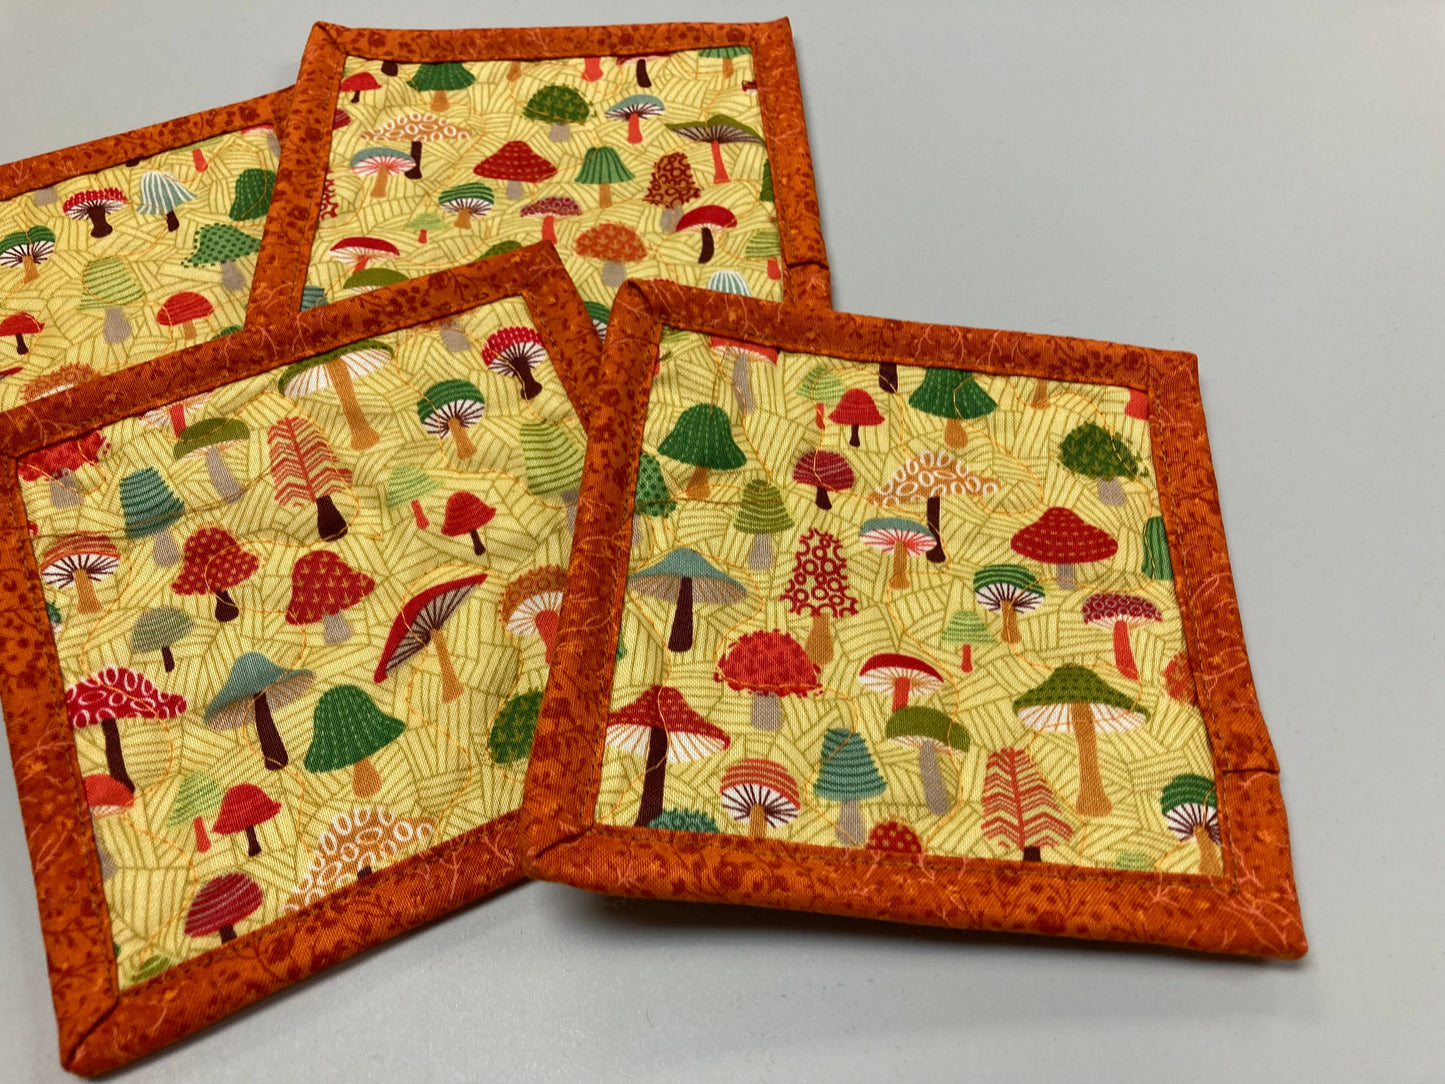 Mushroom Forest Woodland Fabric Coasters for Drinks, 5x5" Large Coffee Tea Beer Hot Cold Washable Reusable Kid’s Snack Mats Orange Green